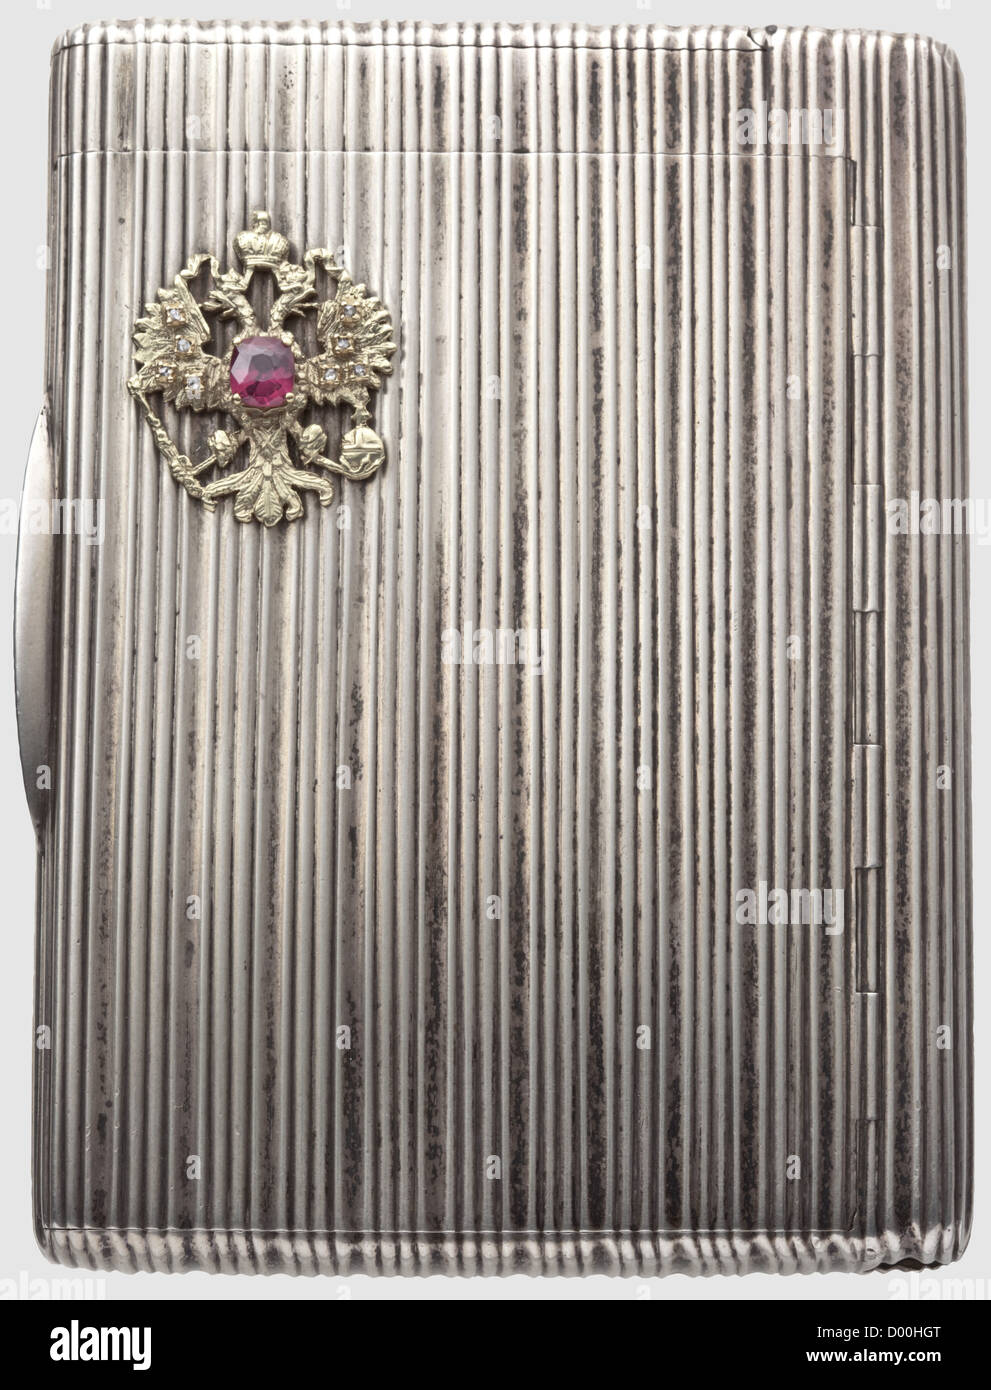 A cigarette case with golden double-headed eagle,Russia circa 1910.Silver,gold-plated interior.The lid bearing a Russian double-headed eagle applied in gold with a bezel set red garnet and eight small rose-cut diamonds.The interior with illegible master marks 'J??' and hallmarks for '84' zolotniki.10.5 x 7.7 x 1.7 cm,weight 226 g.Including a name card of Count Otto Czernin.The cigarette case formerly belonged to the Austrian diplomat Count Otto Rudolf Czernin(1875 - 1962).Before the First World War he was counsellor of embassy in Saint Petersburg and,Additional-Rights-Clearences-Not Available Stock Photo